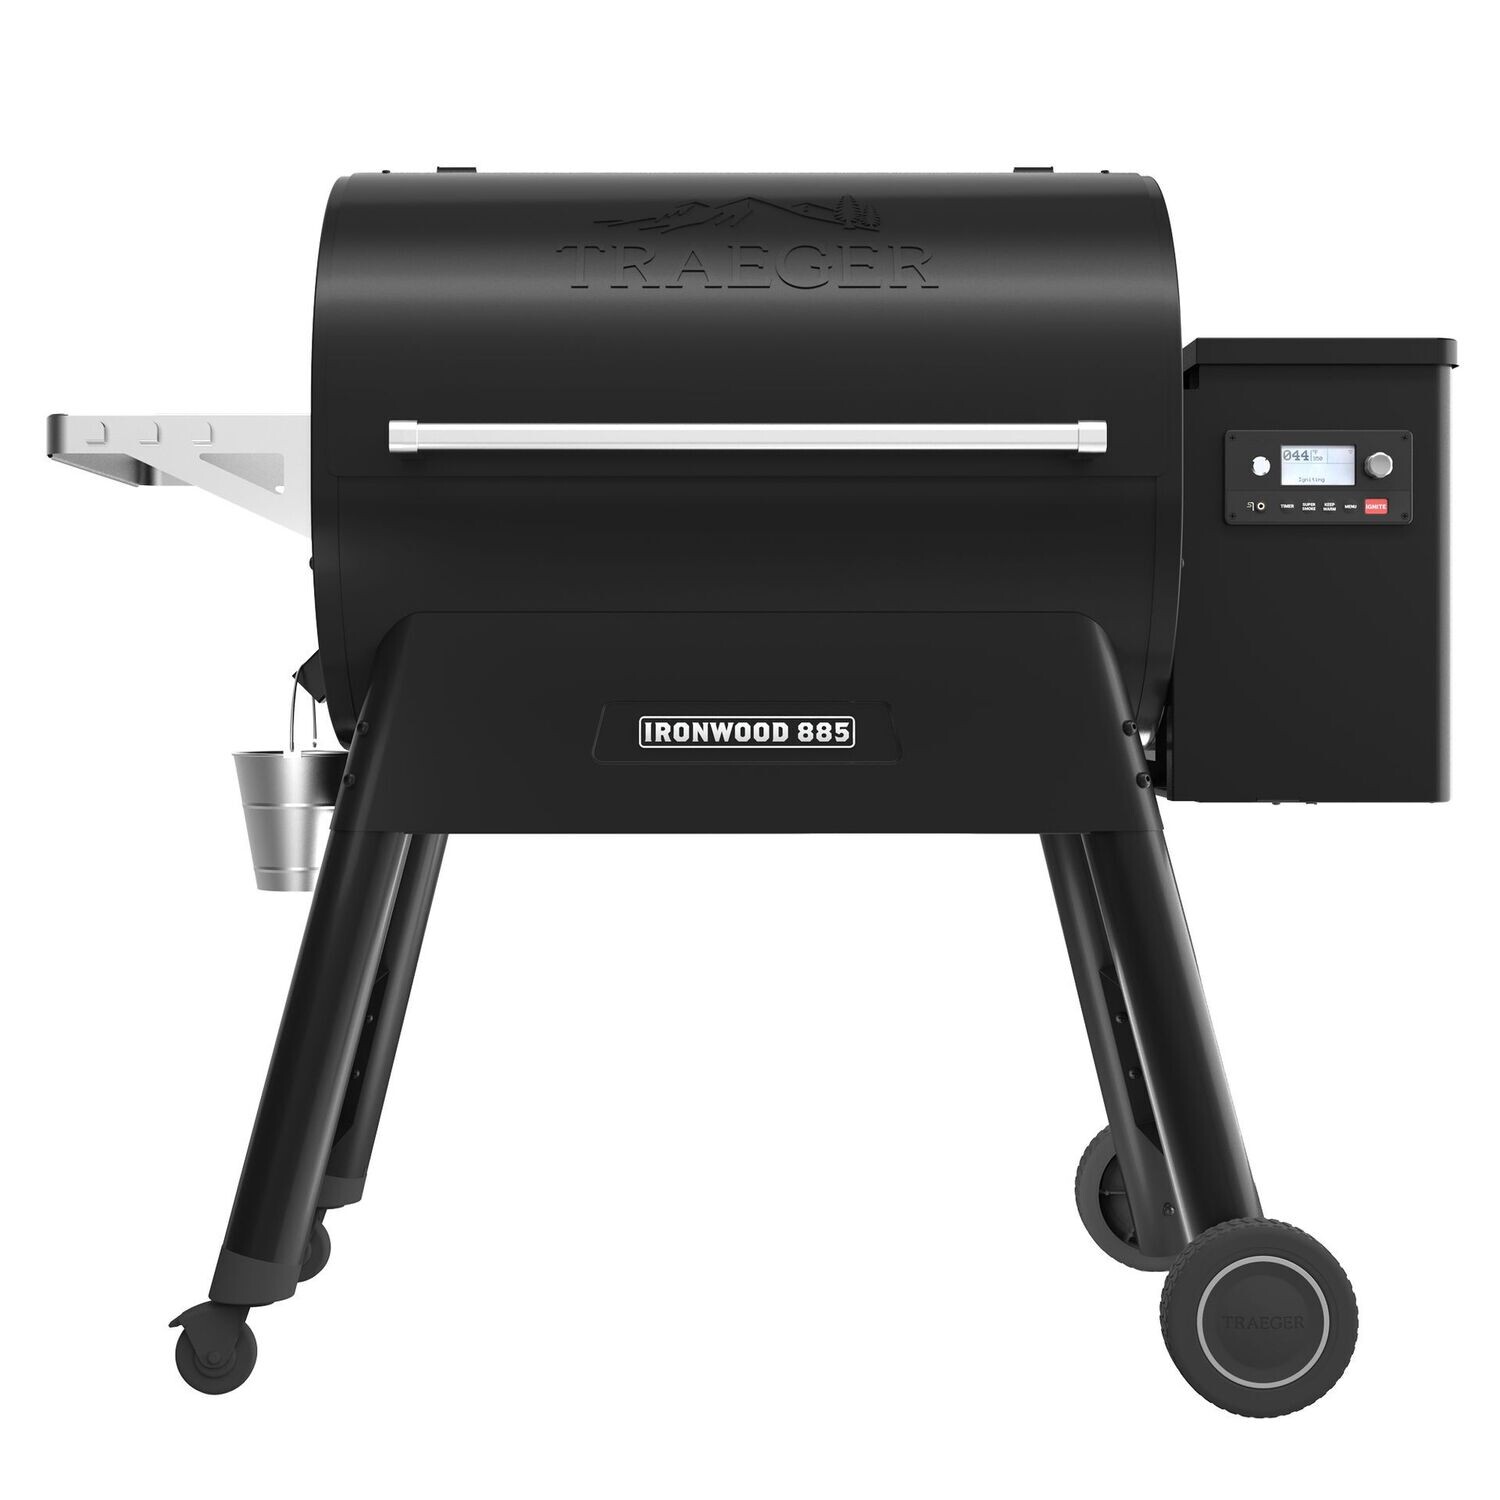 Traeger Ironwood 885 Pellet Grill (Includes Front Shelf & Cover) £1399